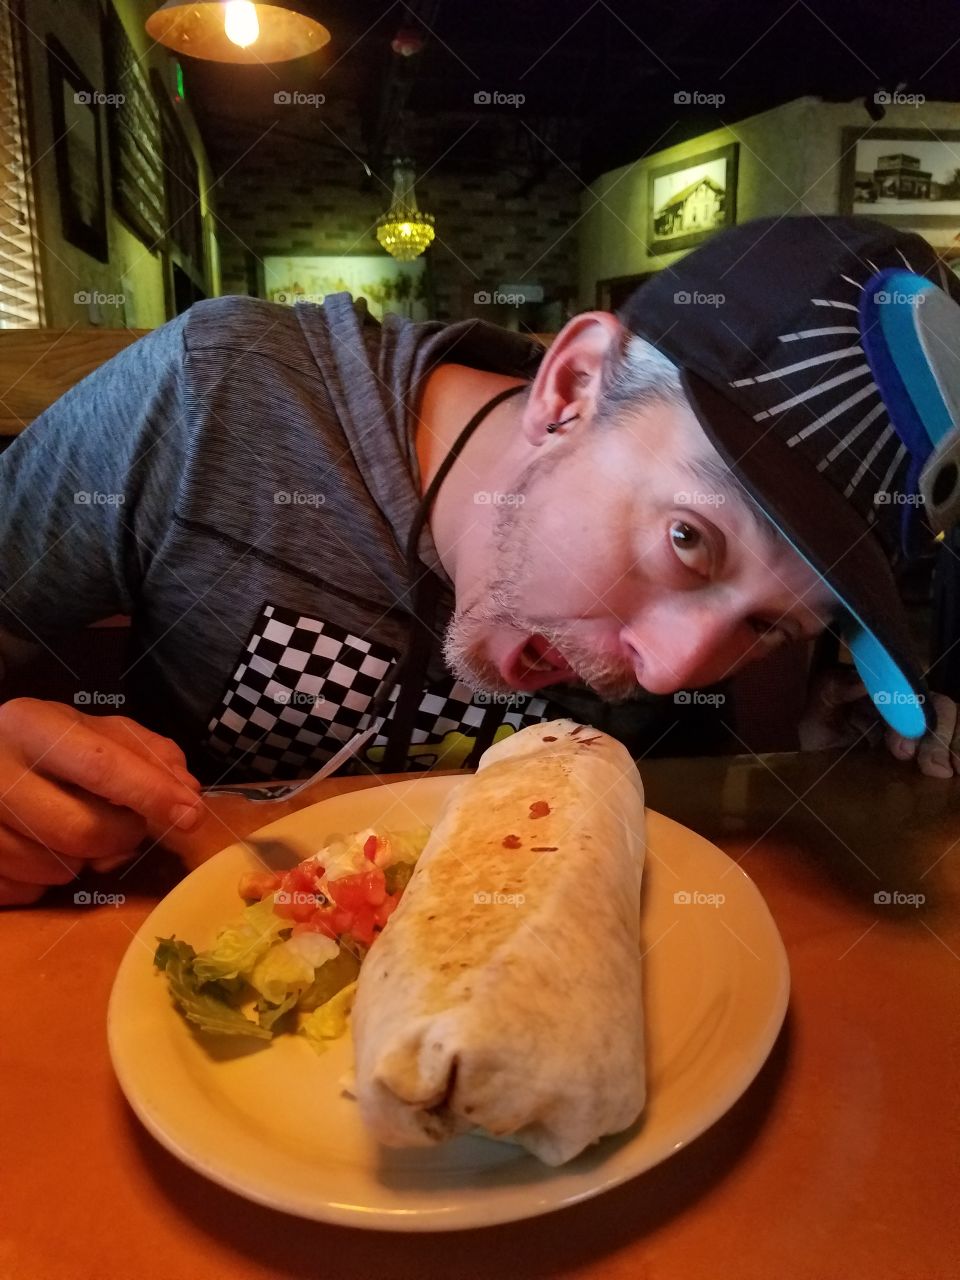 Eating a giant Colorado style burrito that is way too big for his mouth at a local Mexican restaurant.